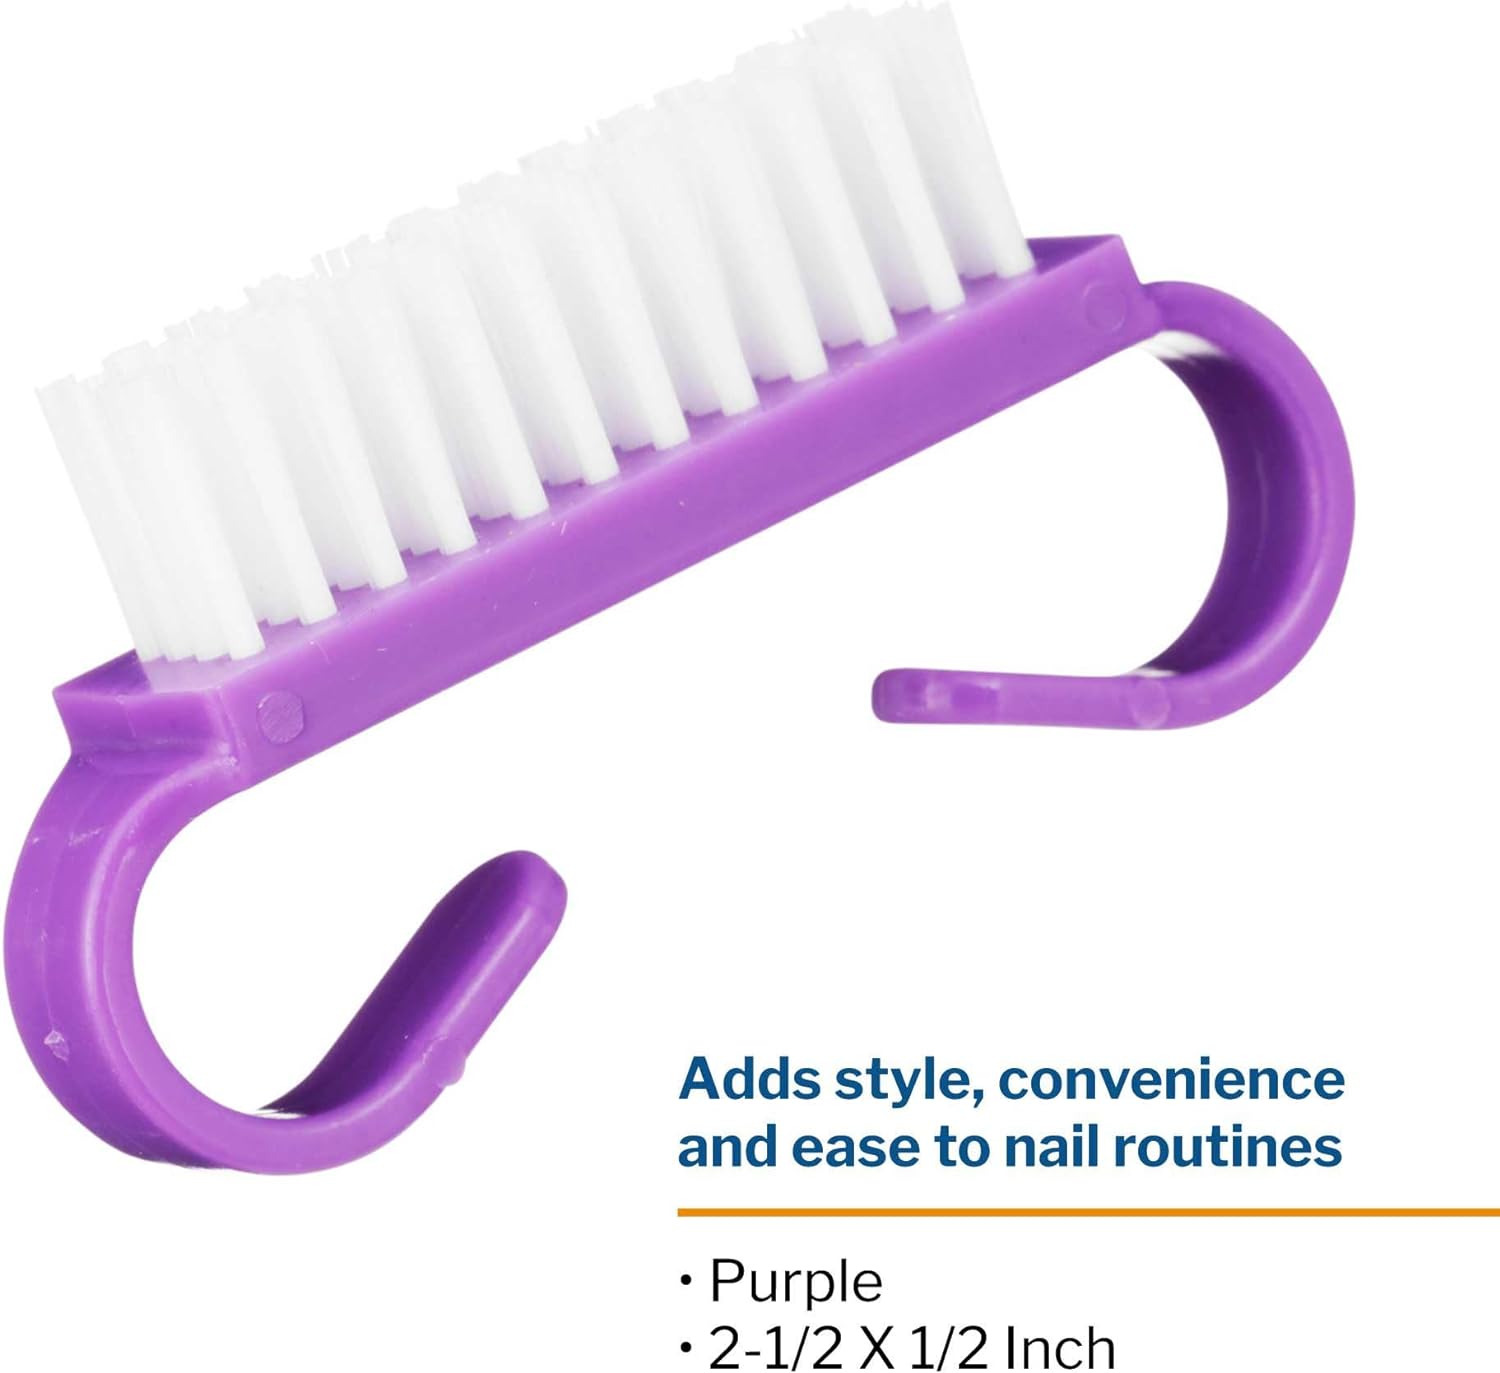 McKesson Nail Brush, Easy Grip Handle, Single Use/Disposable, Purple, 50 Count